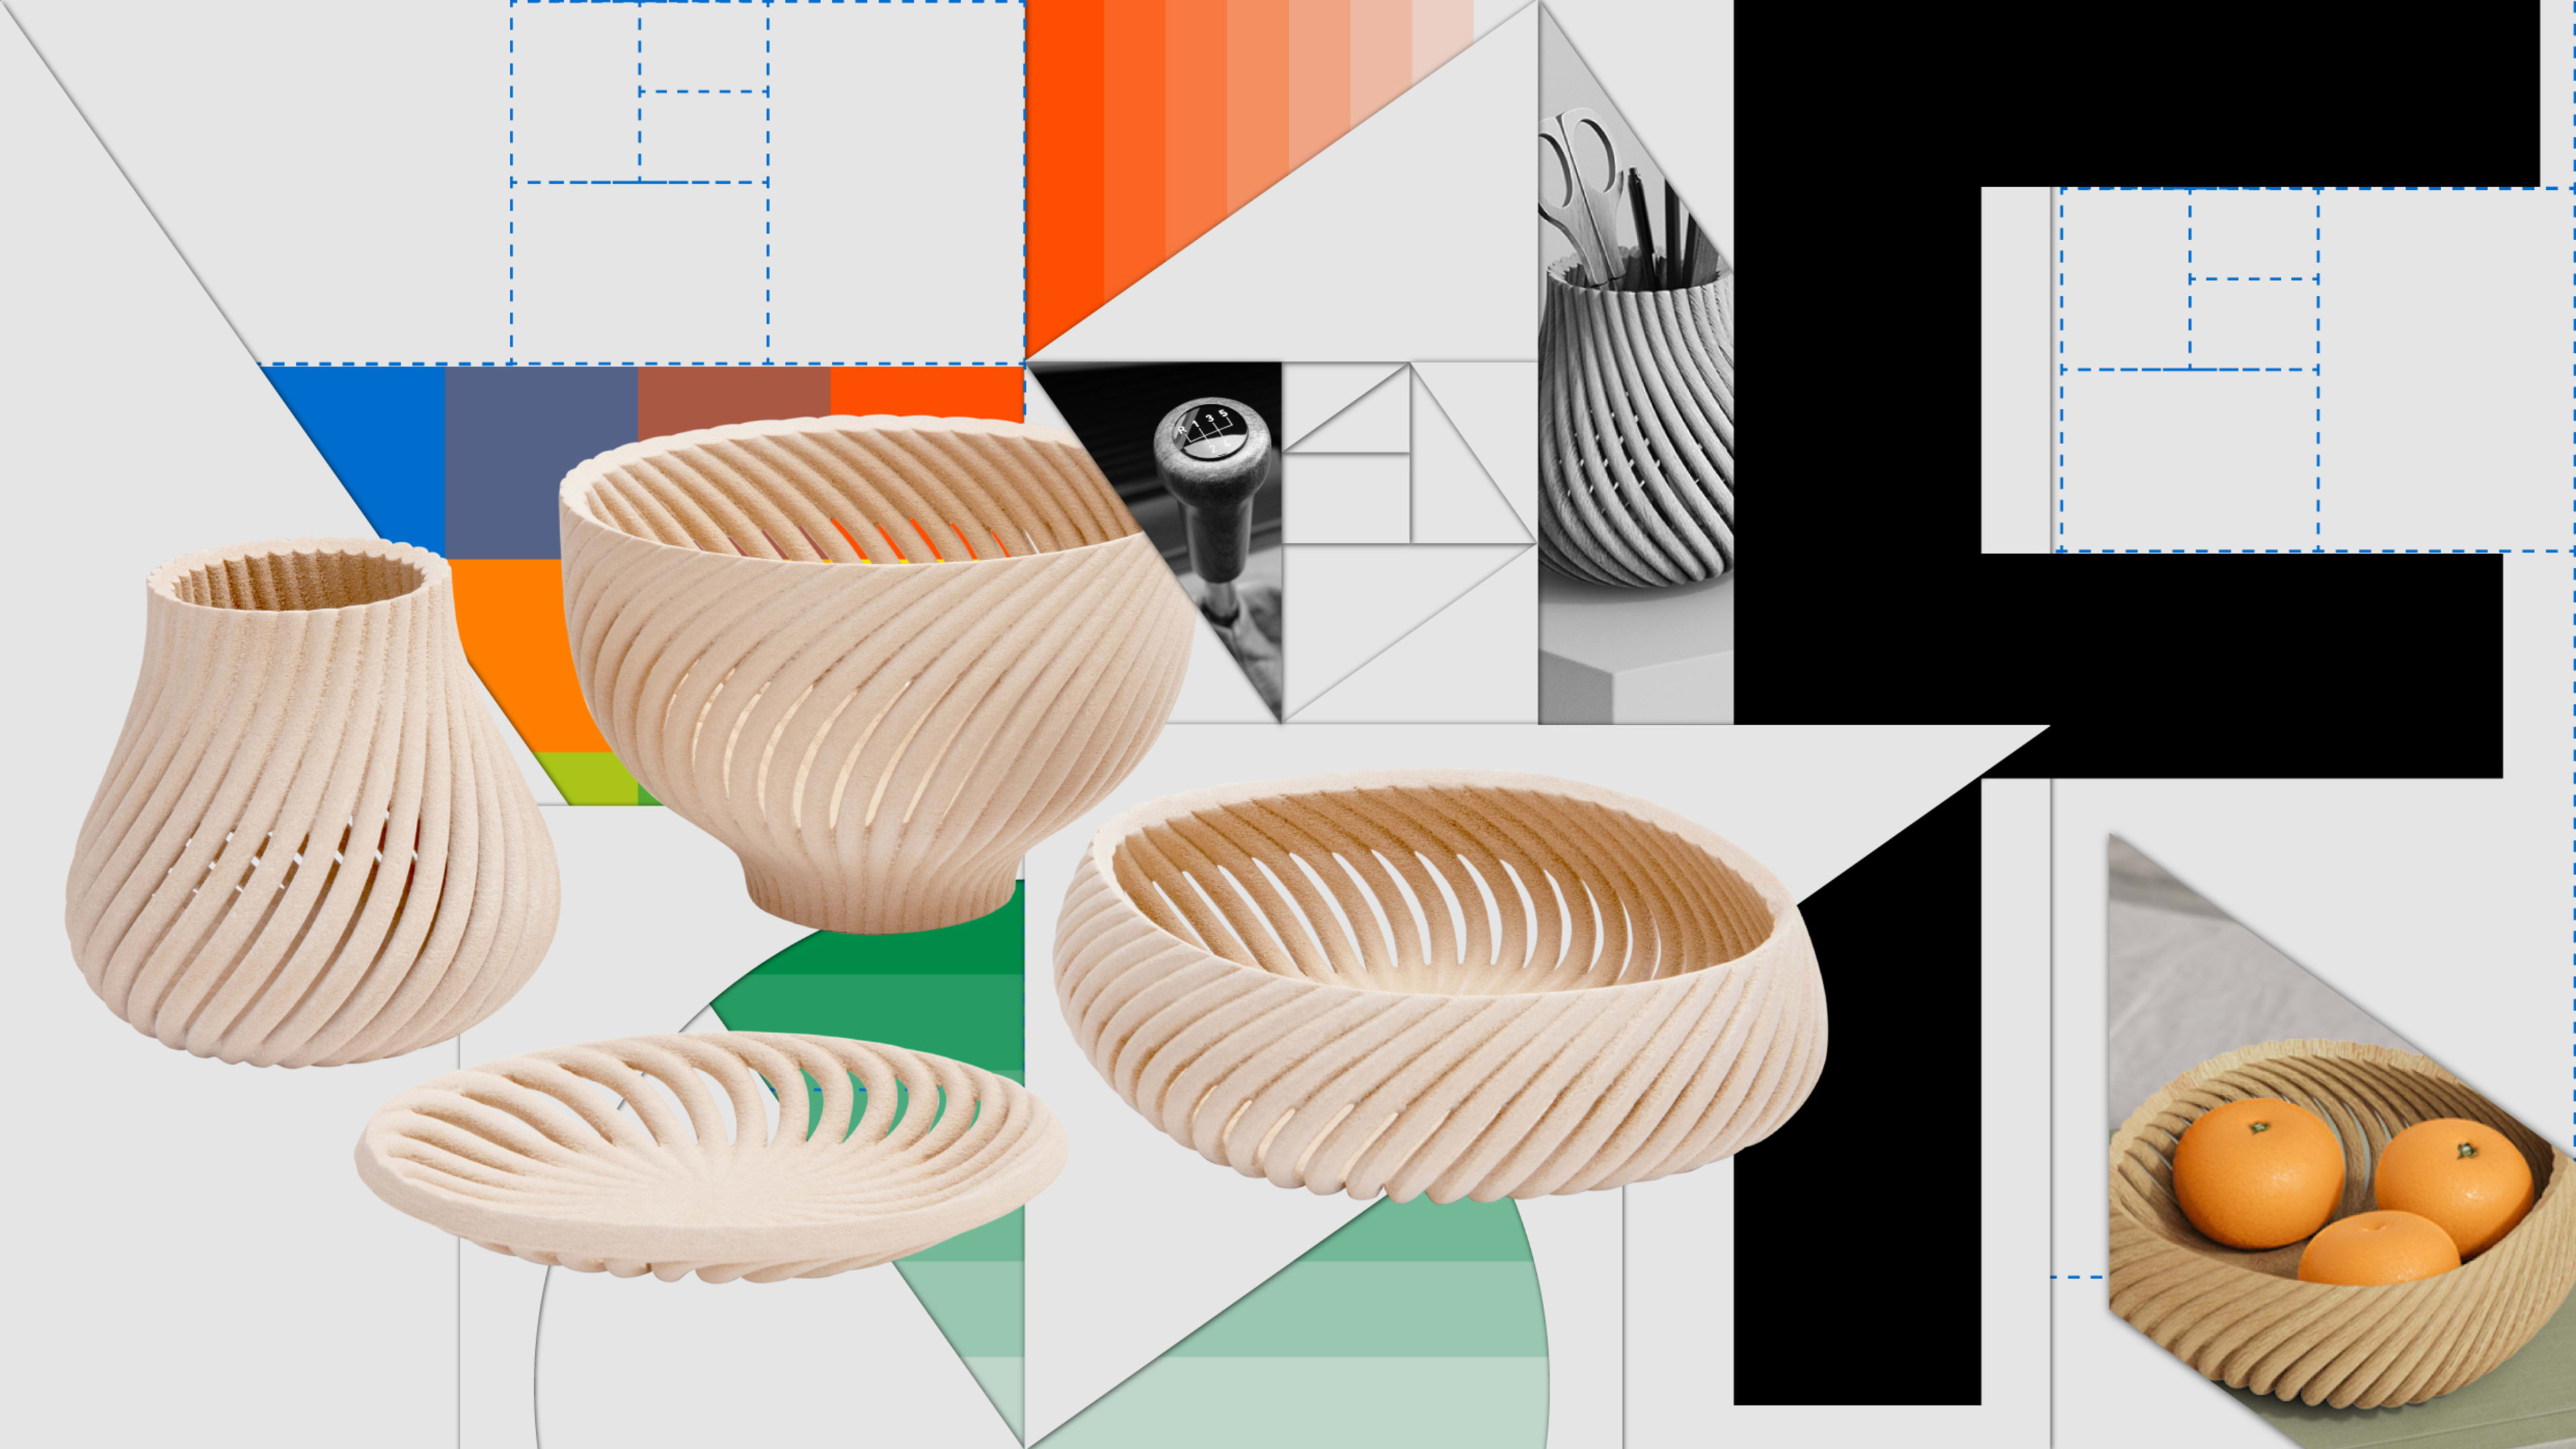 These gorgeous bowls were made out of 3D-printed sawdust